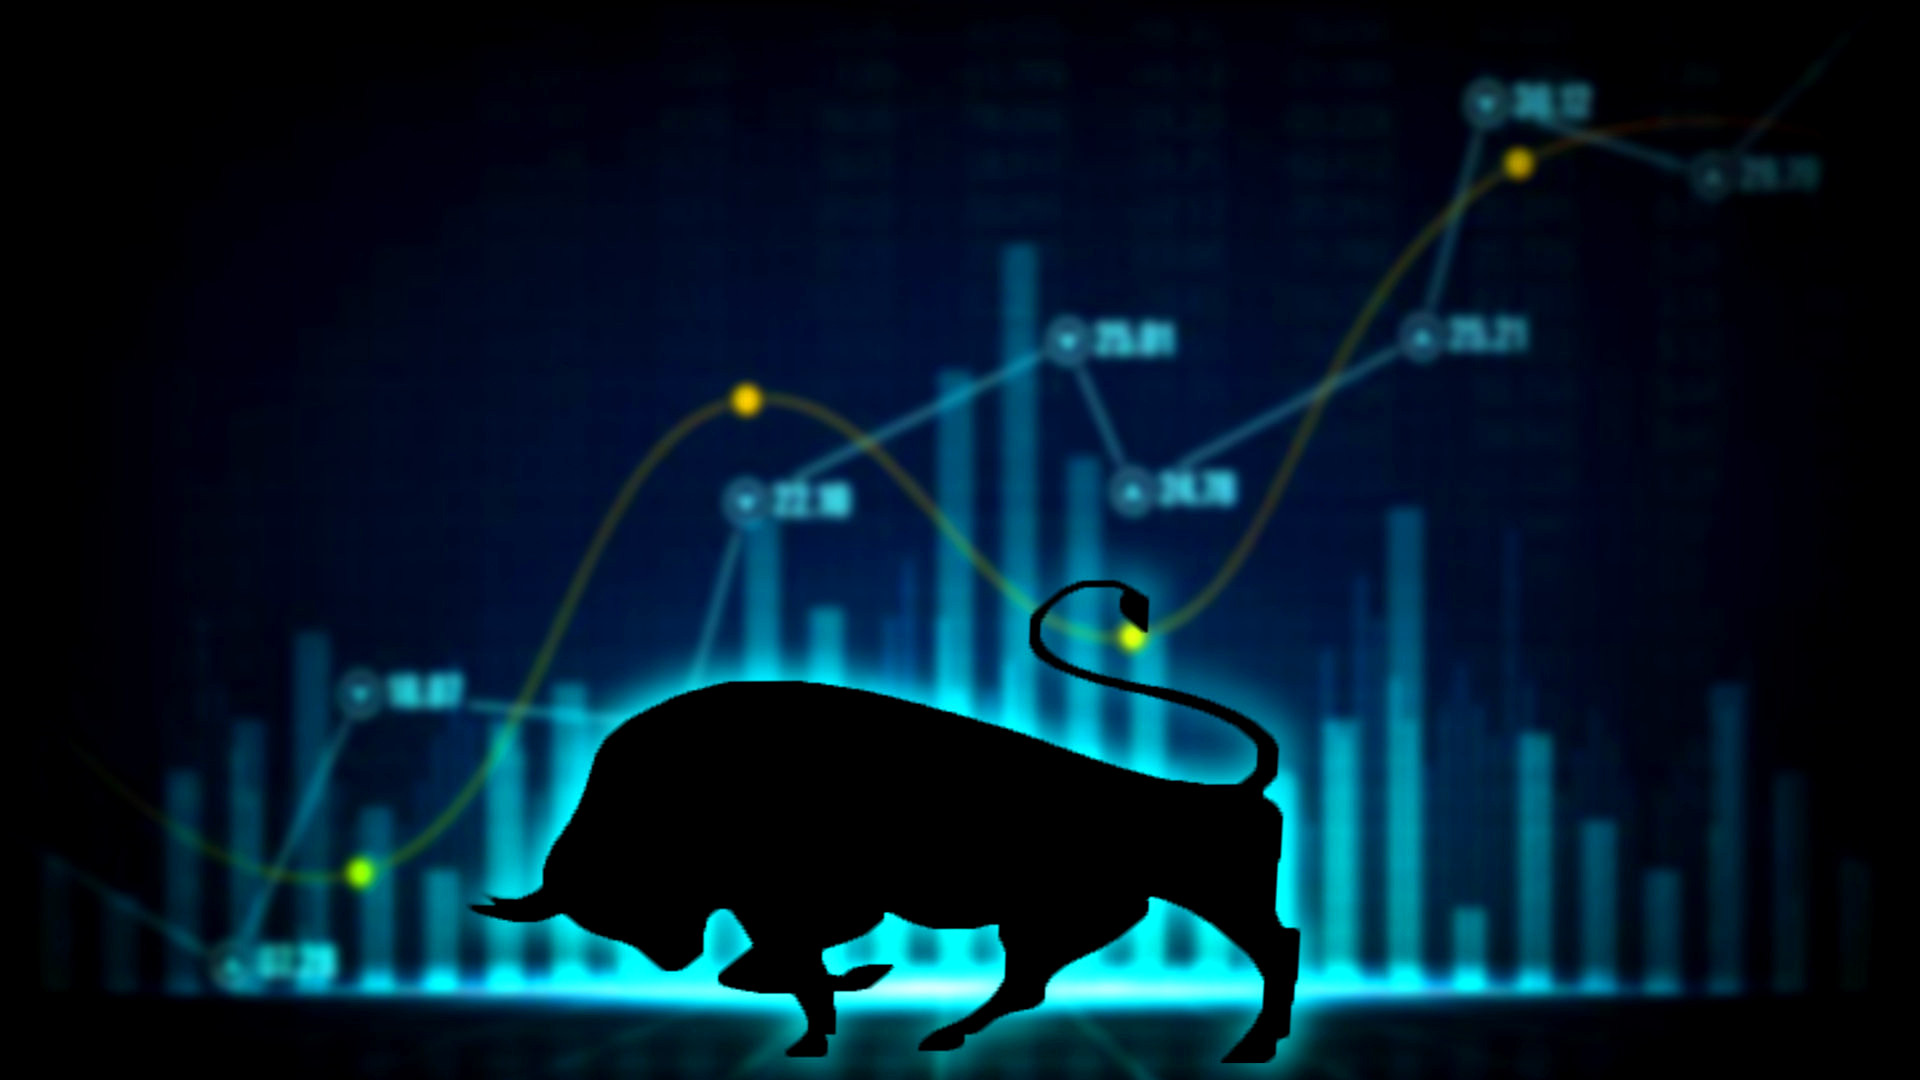 Bull market concept with stock chart and the indicator show an uptrend / stock market bull finance safe trend investment business and positive market